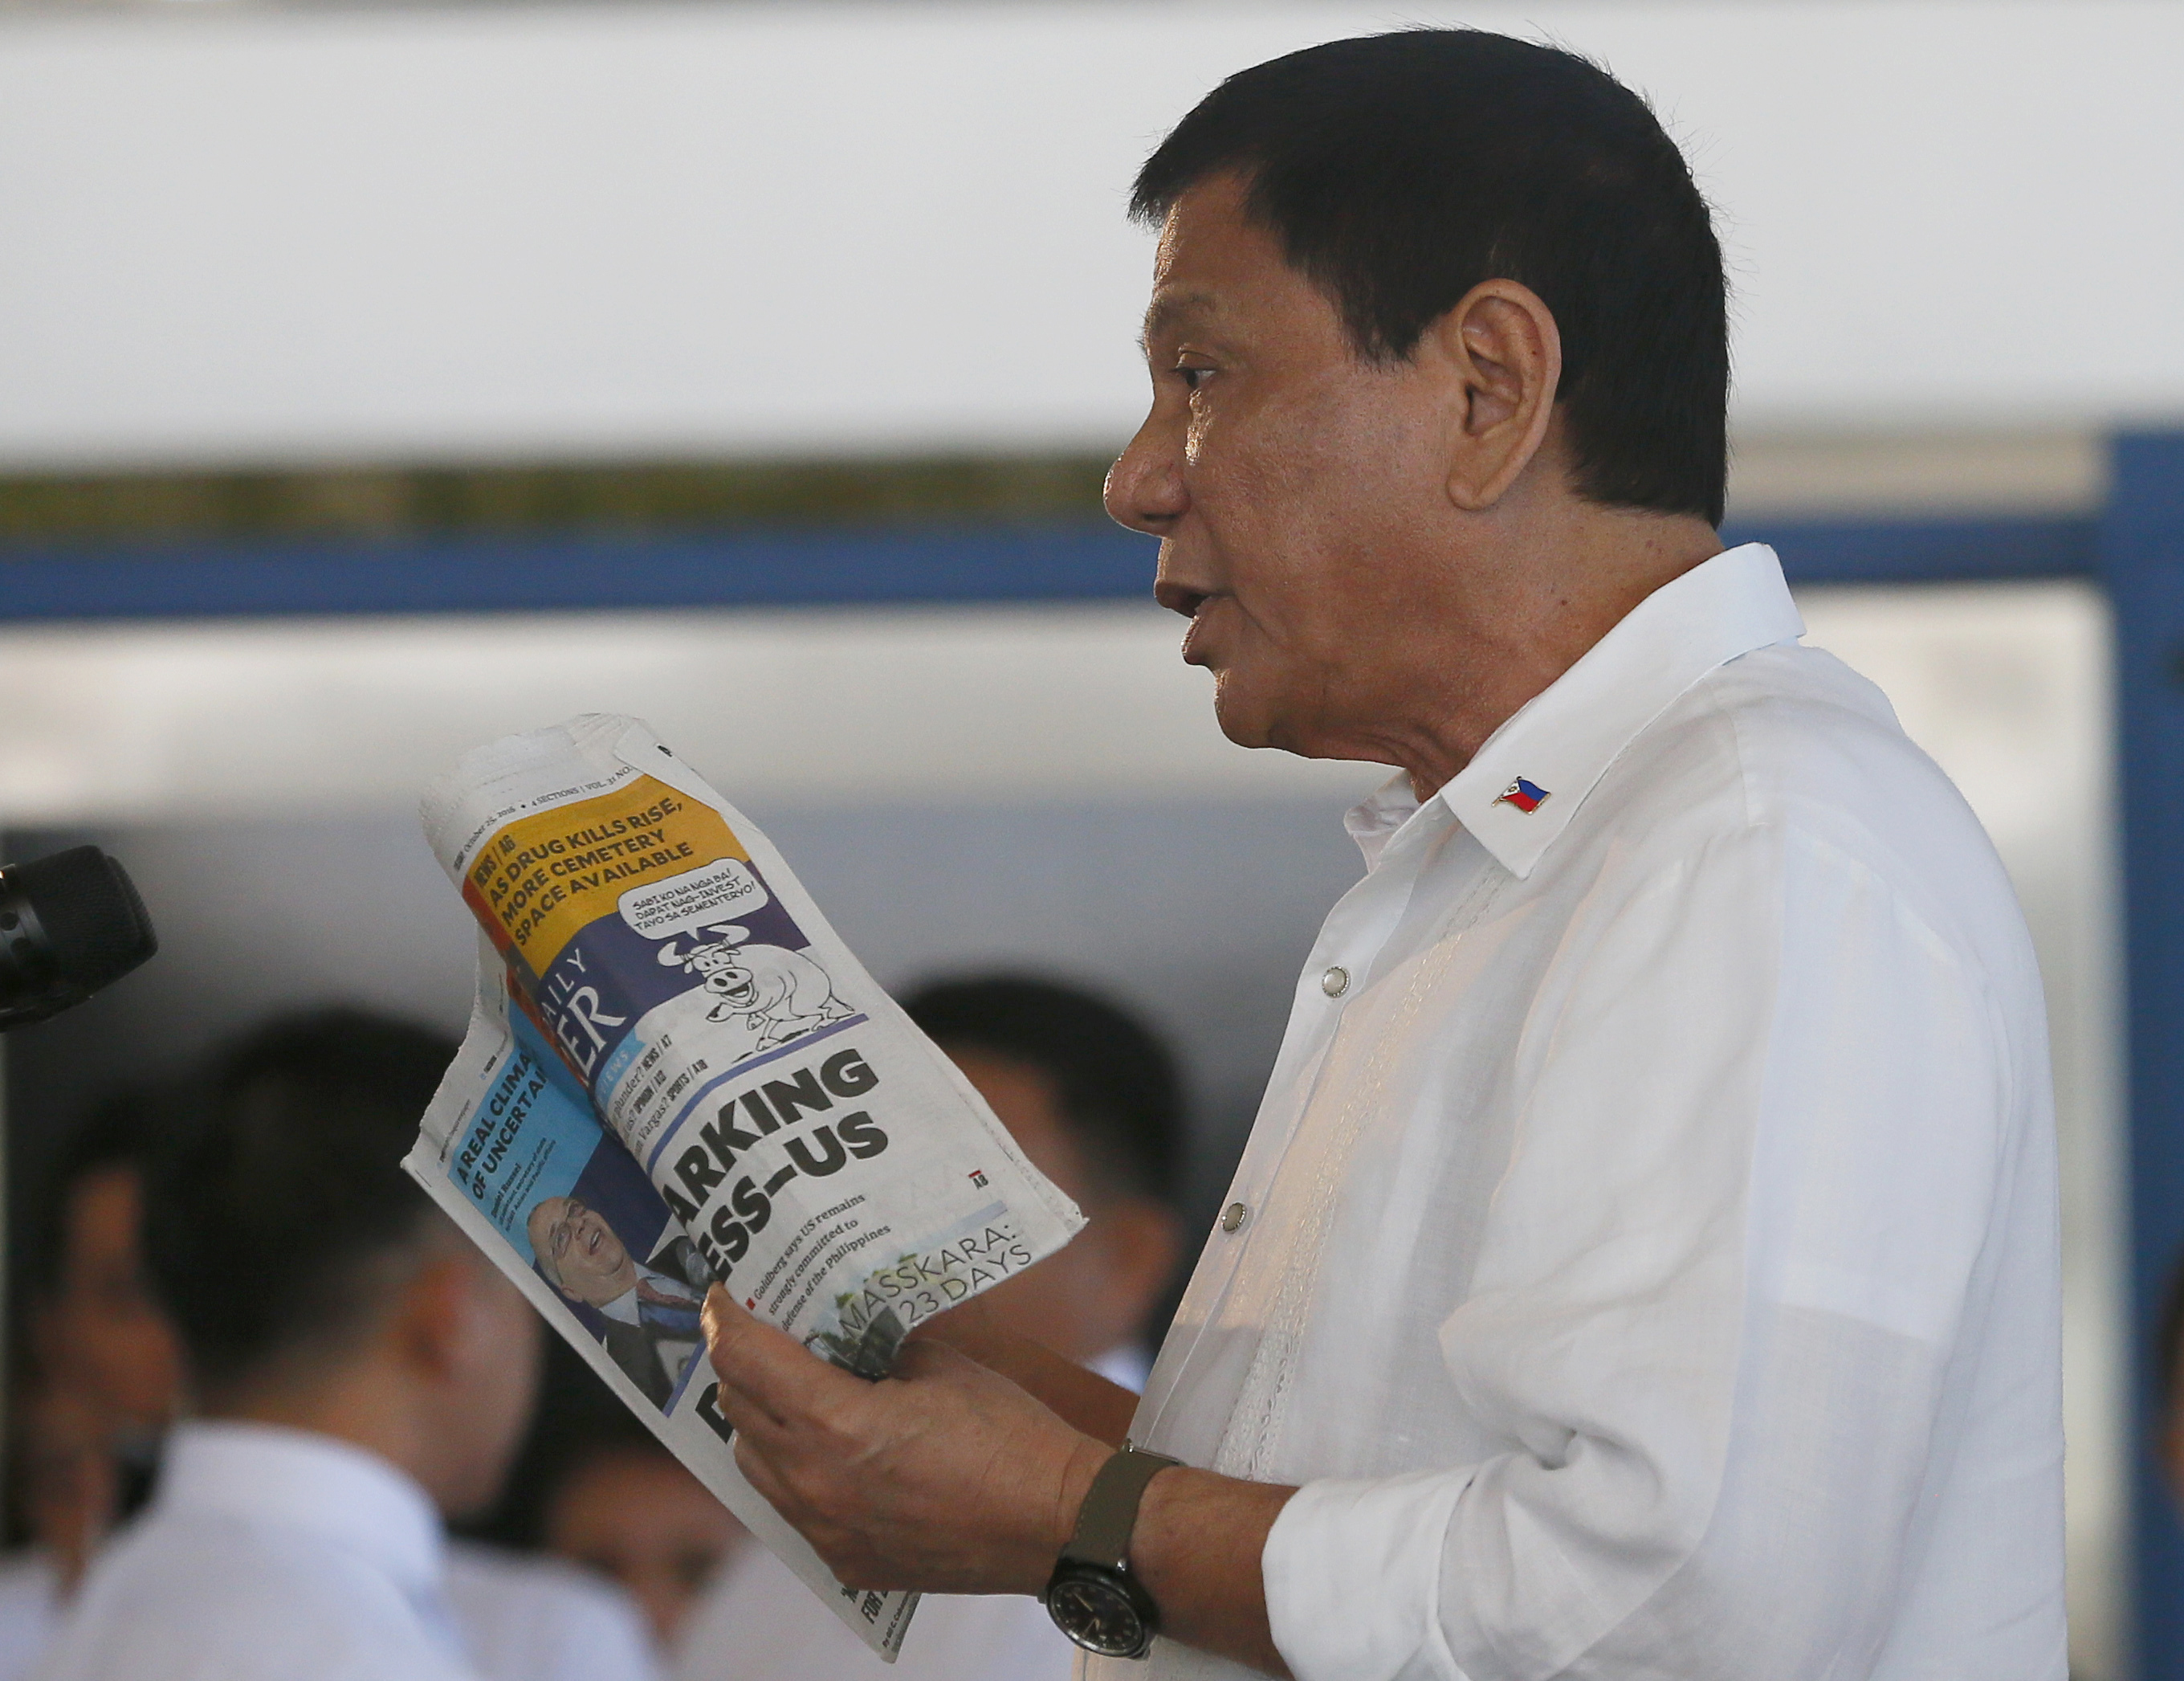 Philippine President Rodrigo Duterte holds a copy of the Philippine Daily Inquirer with the headline: "Duterte sparking international distress-U.S." during a news conference in 2016